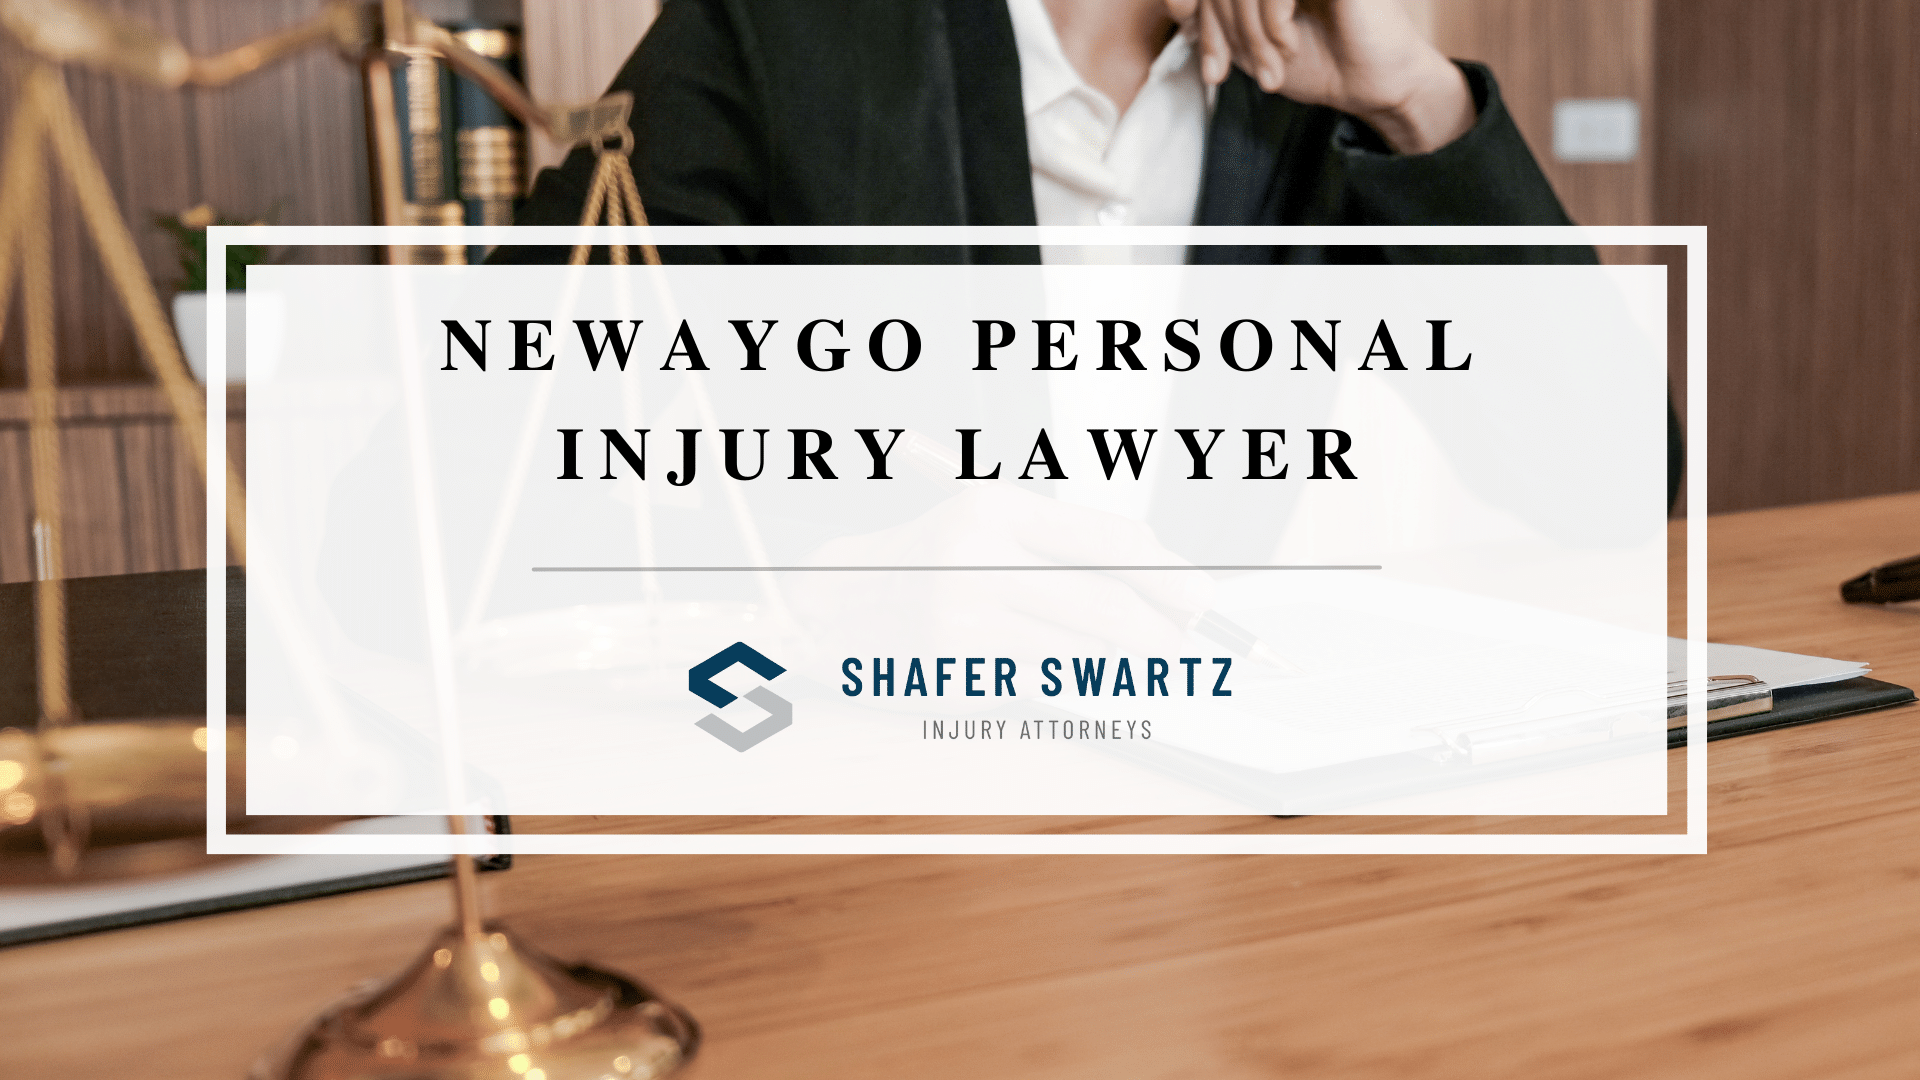 Featured image of Newaygo Personal<br />
Injury Lawyer